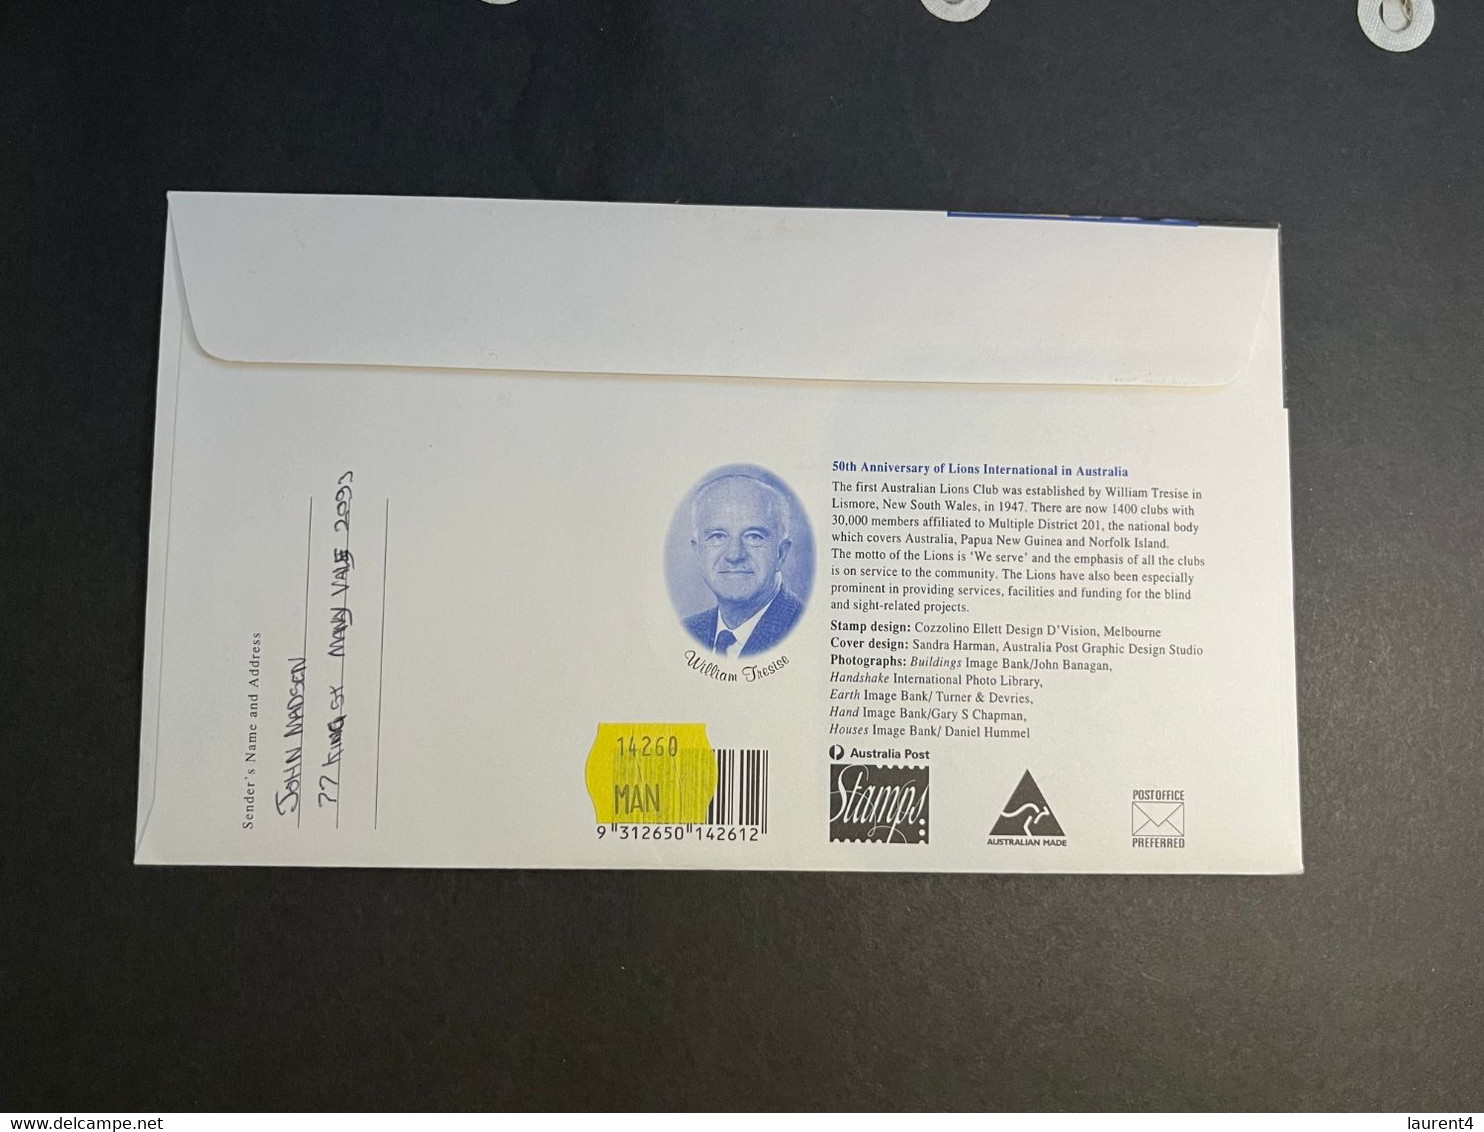 (3 N 35 B) Australia - Underpaid Letter (TAXED) No Stamp Used On Cover (Lions 50th Anniversary FDC Cover) - Variedades Y Curiosidades